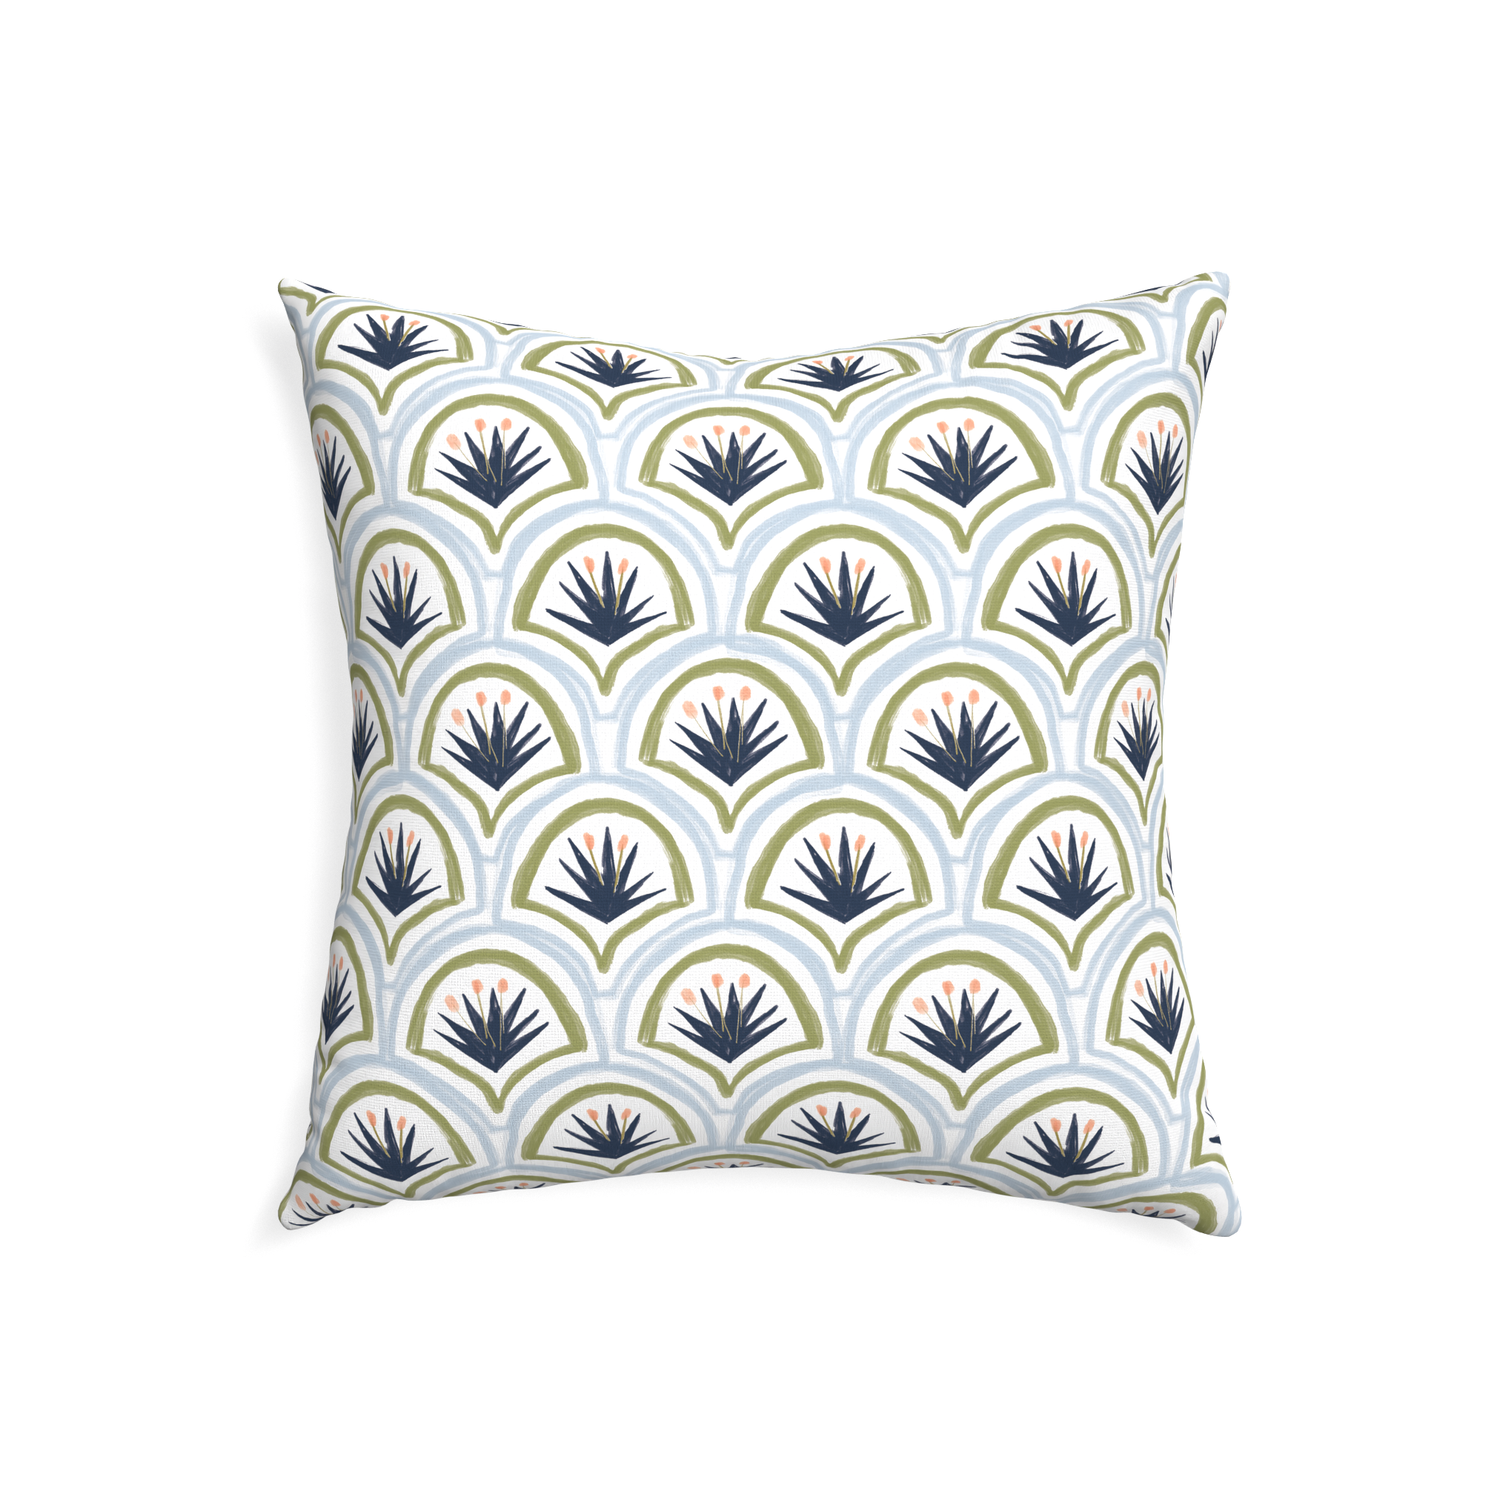 22-square thatcher midnight custom art deco palm patternpillow with none on white background